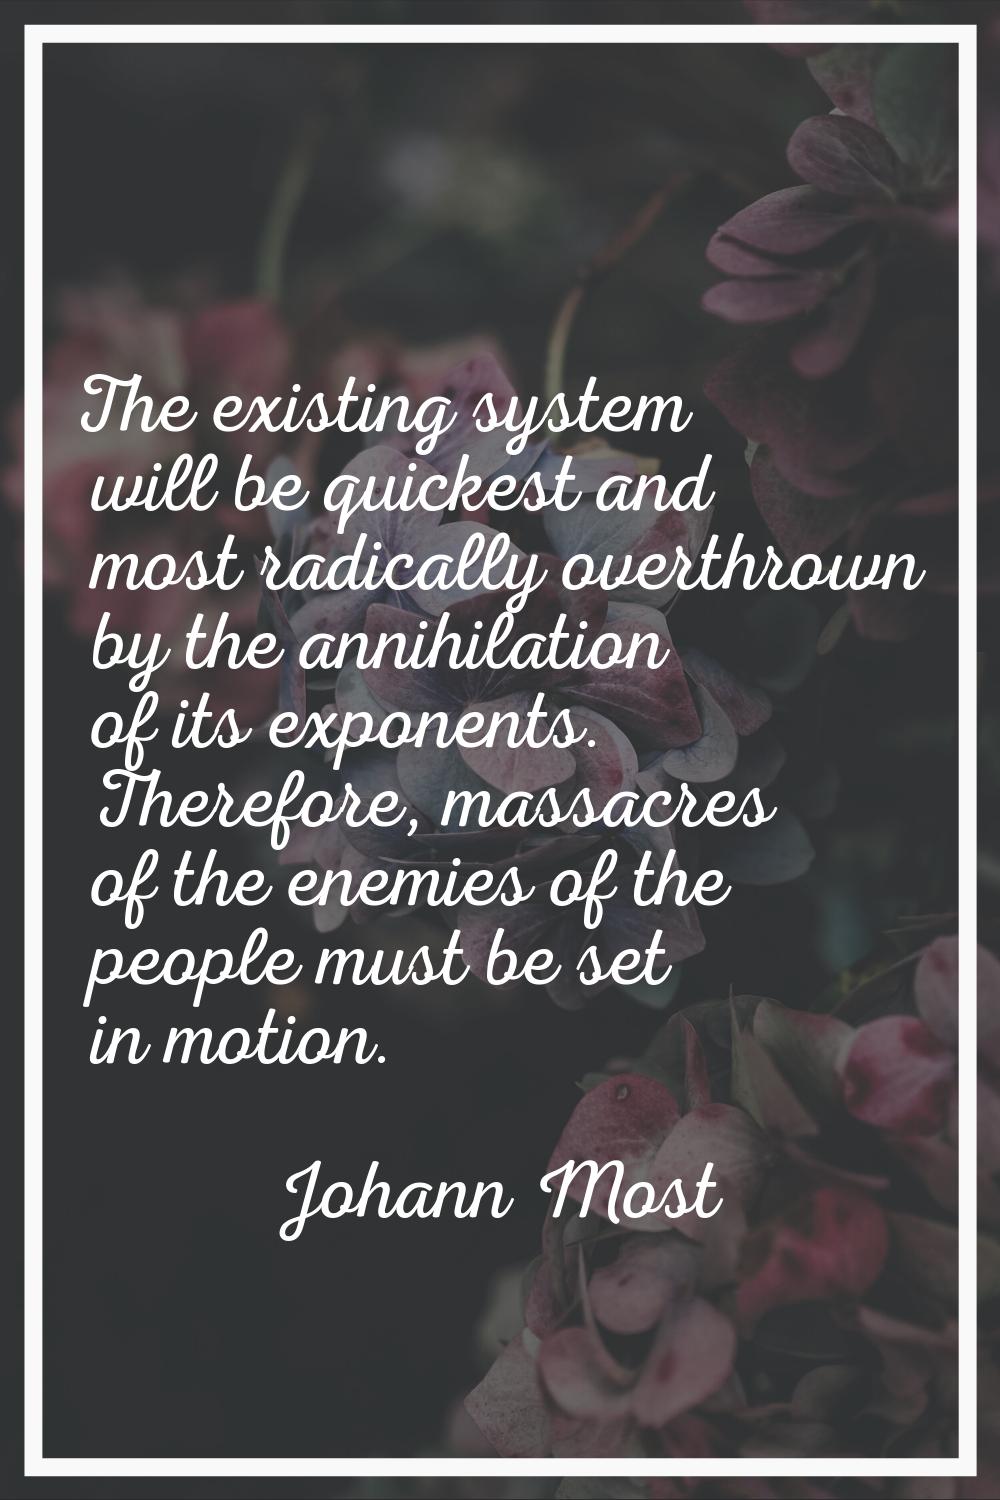 The existing system will be quickest and most radically overthrown by the annihilation of its expon